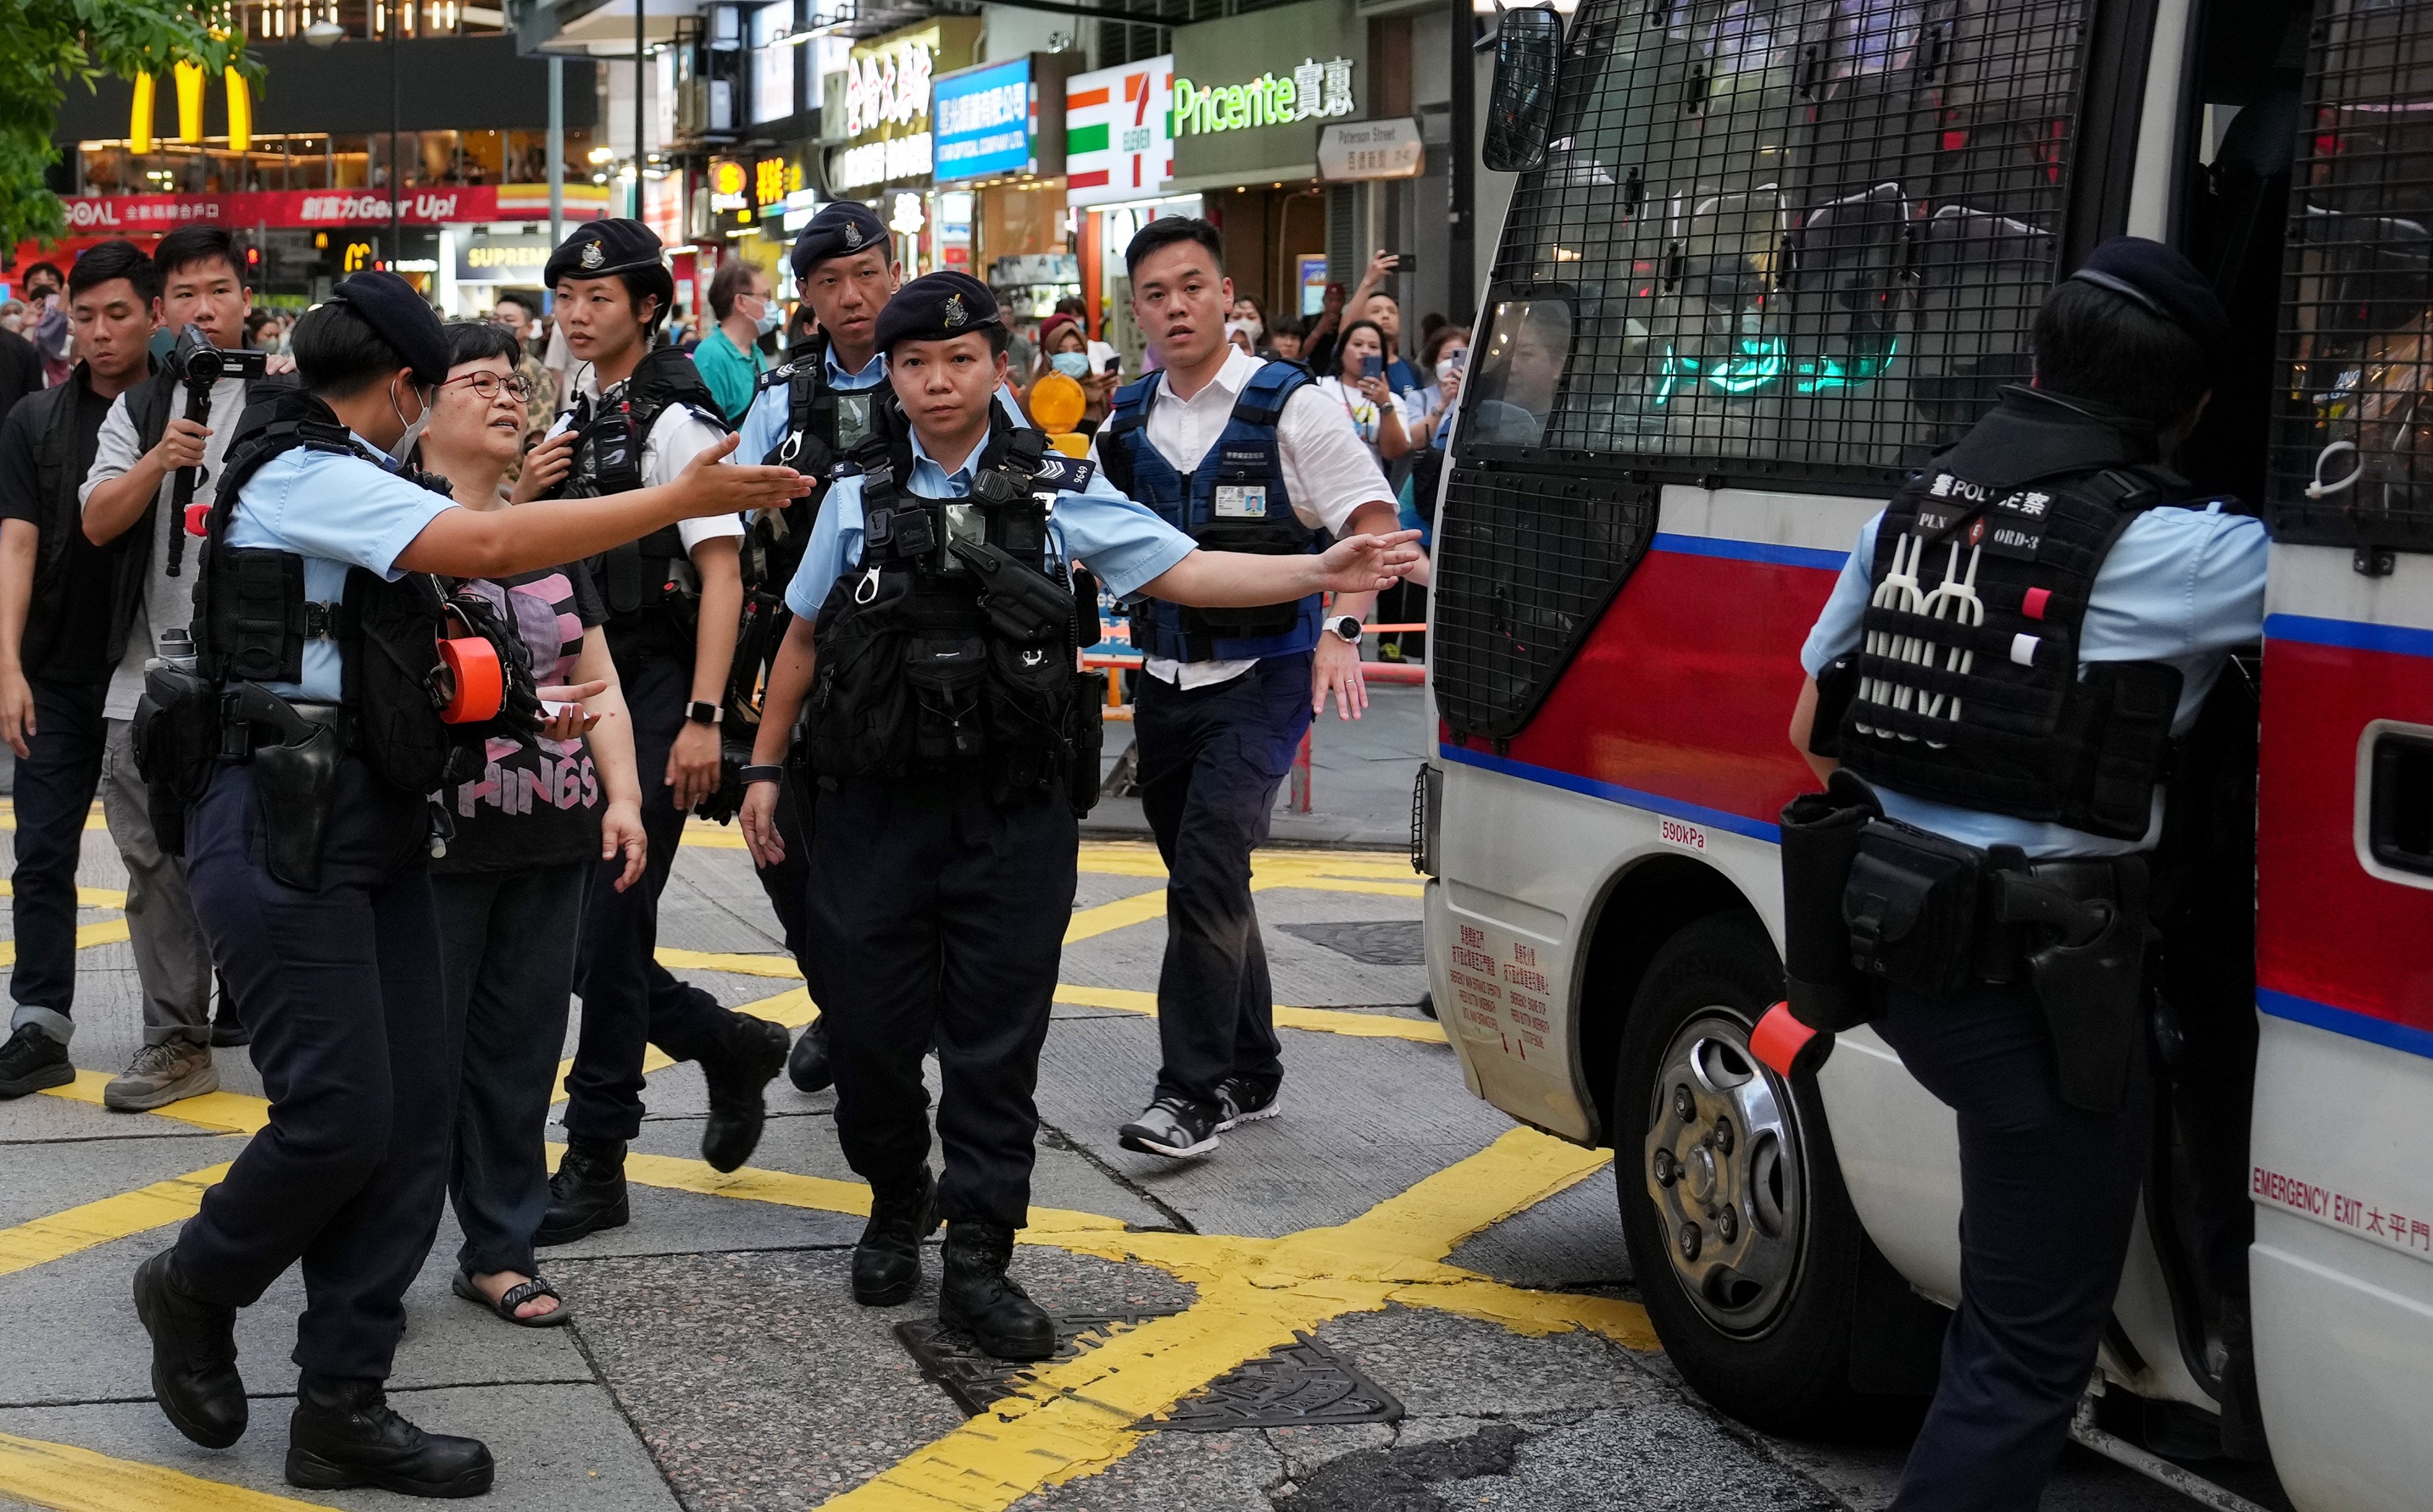 Mak Yin-ting, a veteran journalist and former chairwoman of the Hong Kong Journalists Association, is taken to a police van after she was detained in Causeway Bay, near the traditional site of the Tiananmen Square June 4 crackdown commemoration. Photo: Elson Li